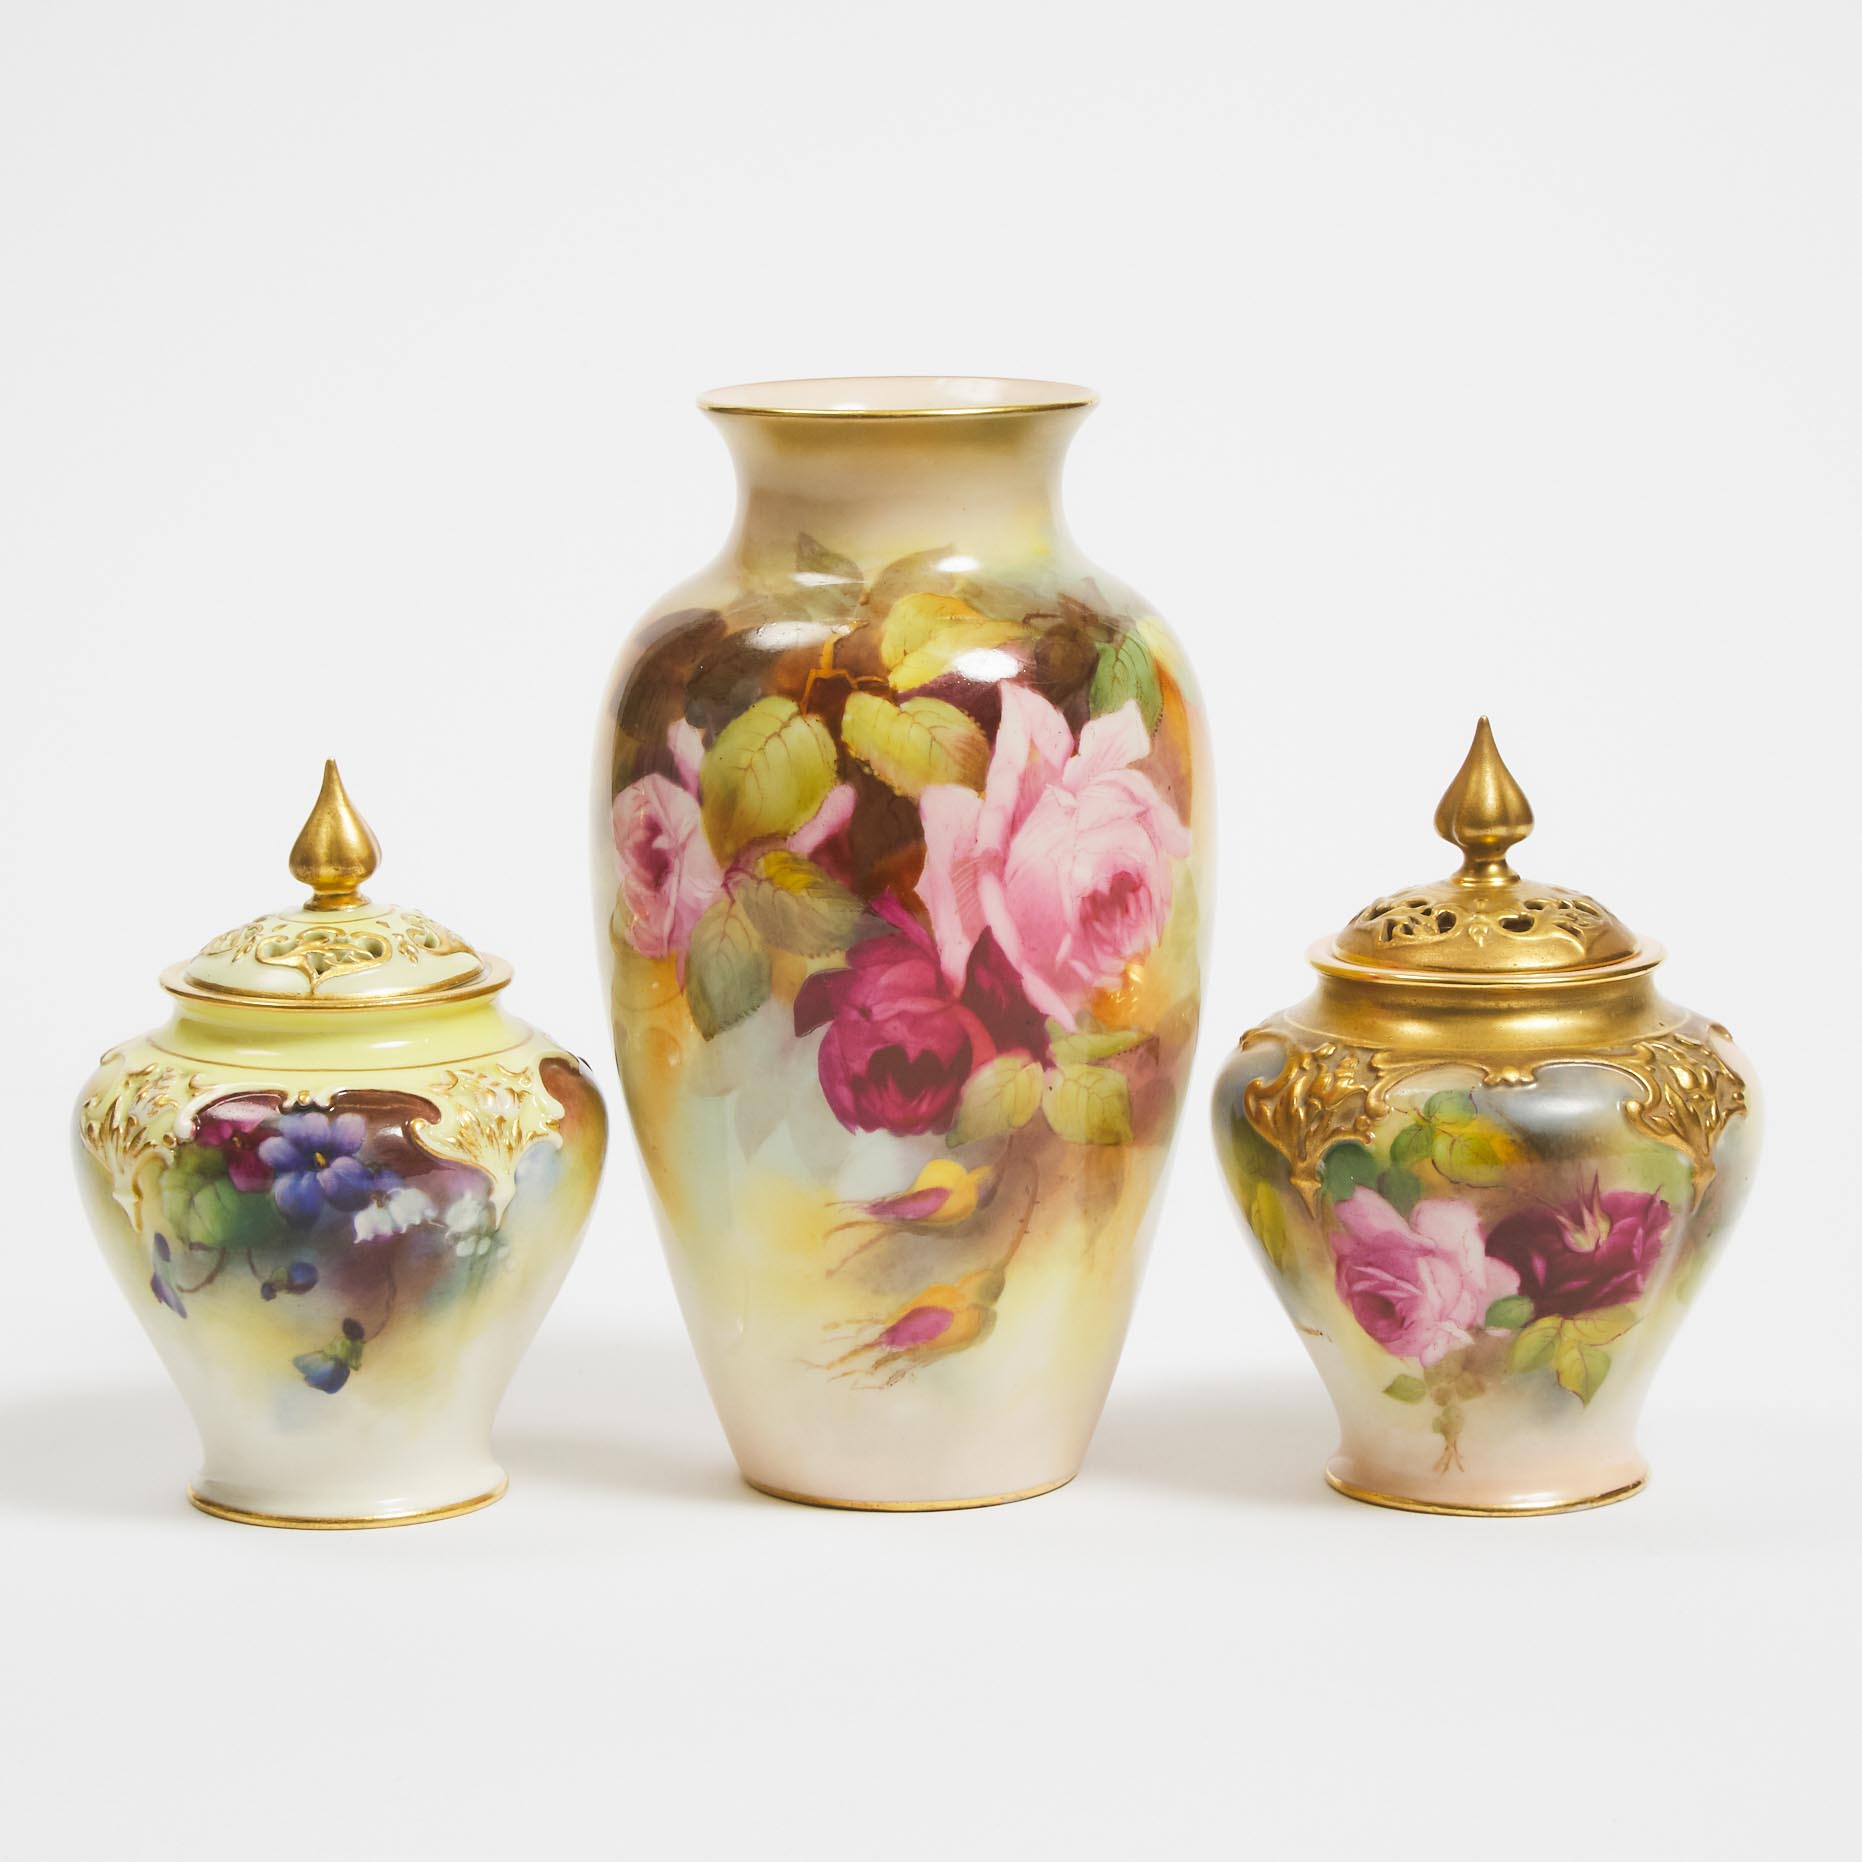 Royal Worcester Hadley Roses Vase and Two Potpourri Vases with Covers, c.1905-17